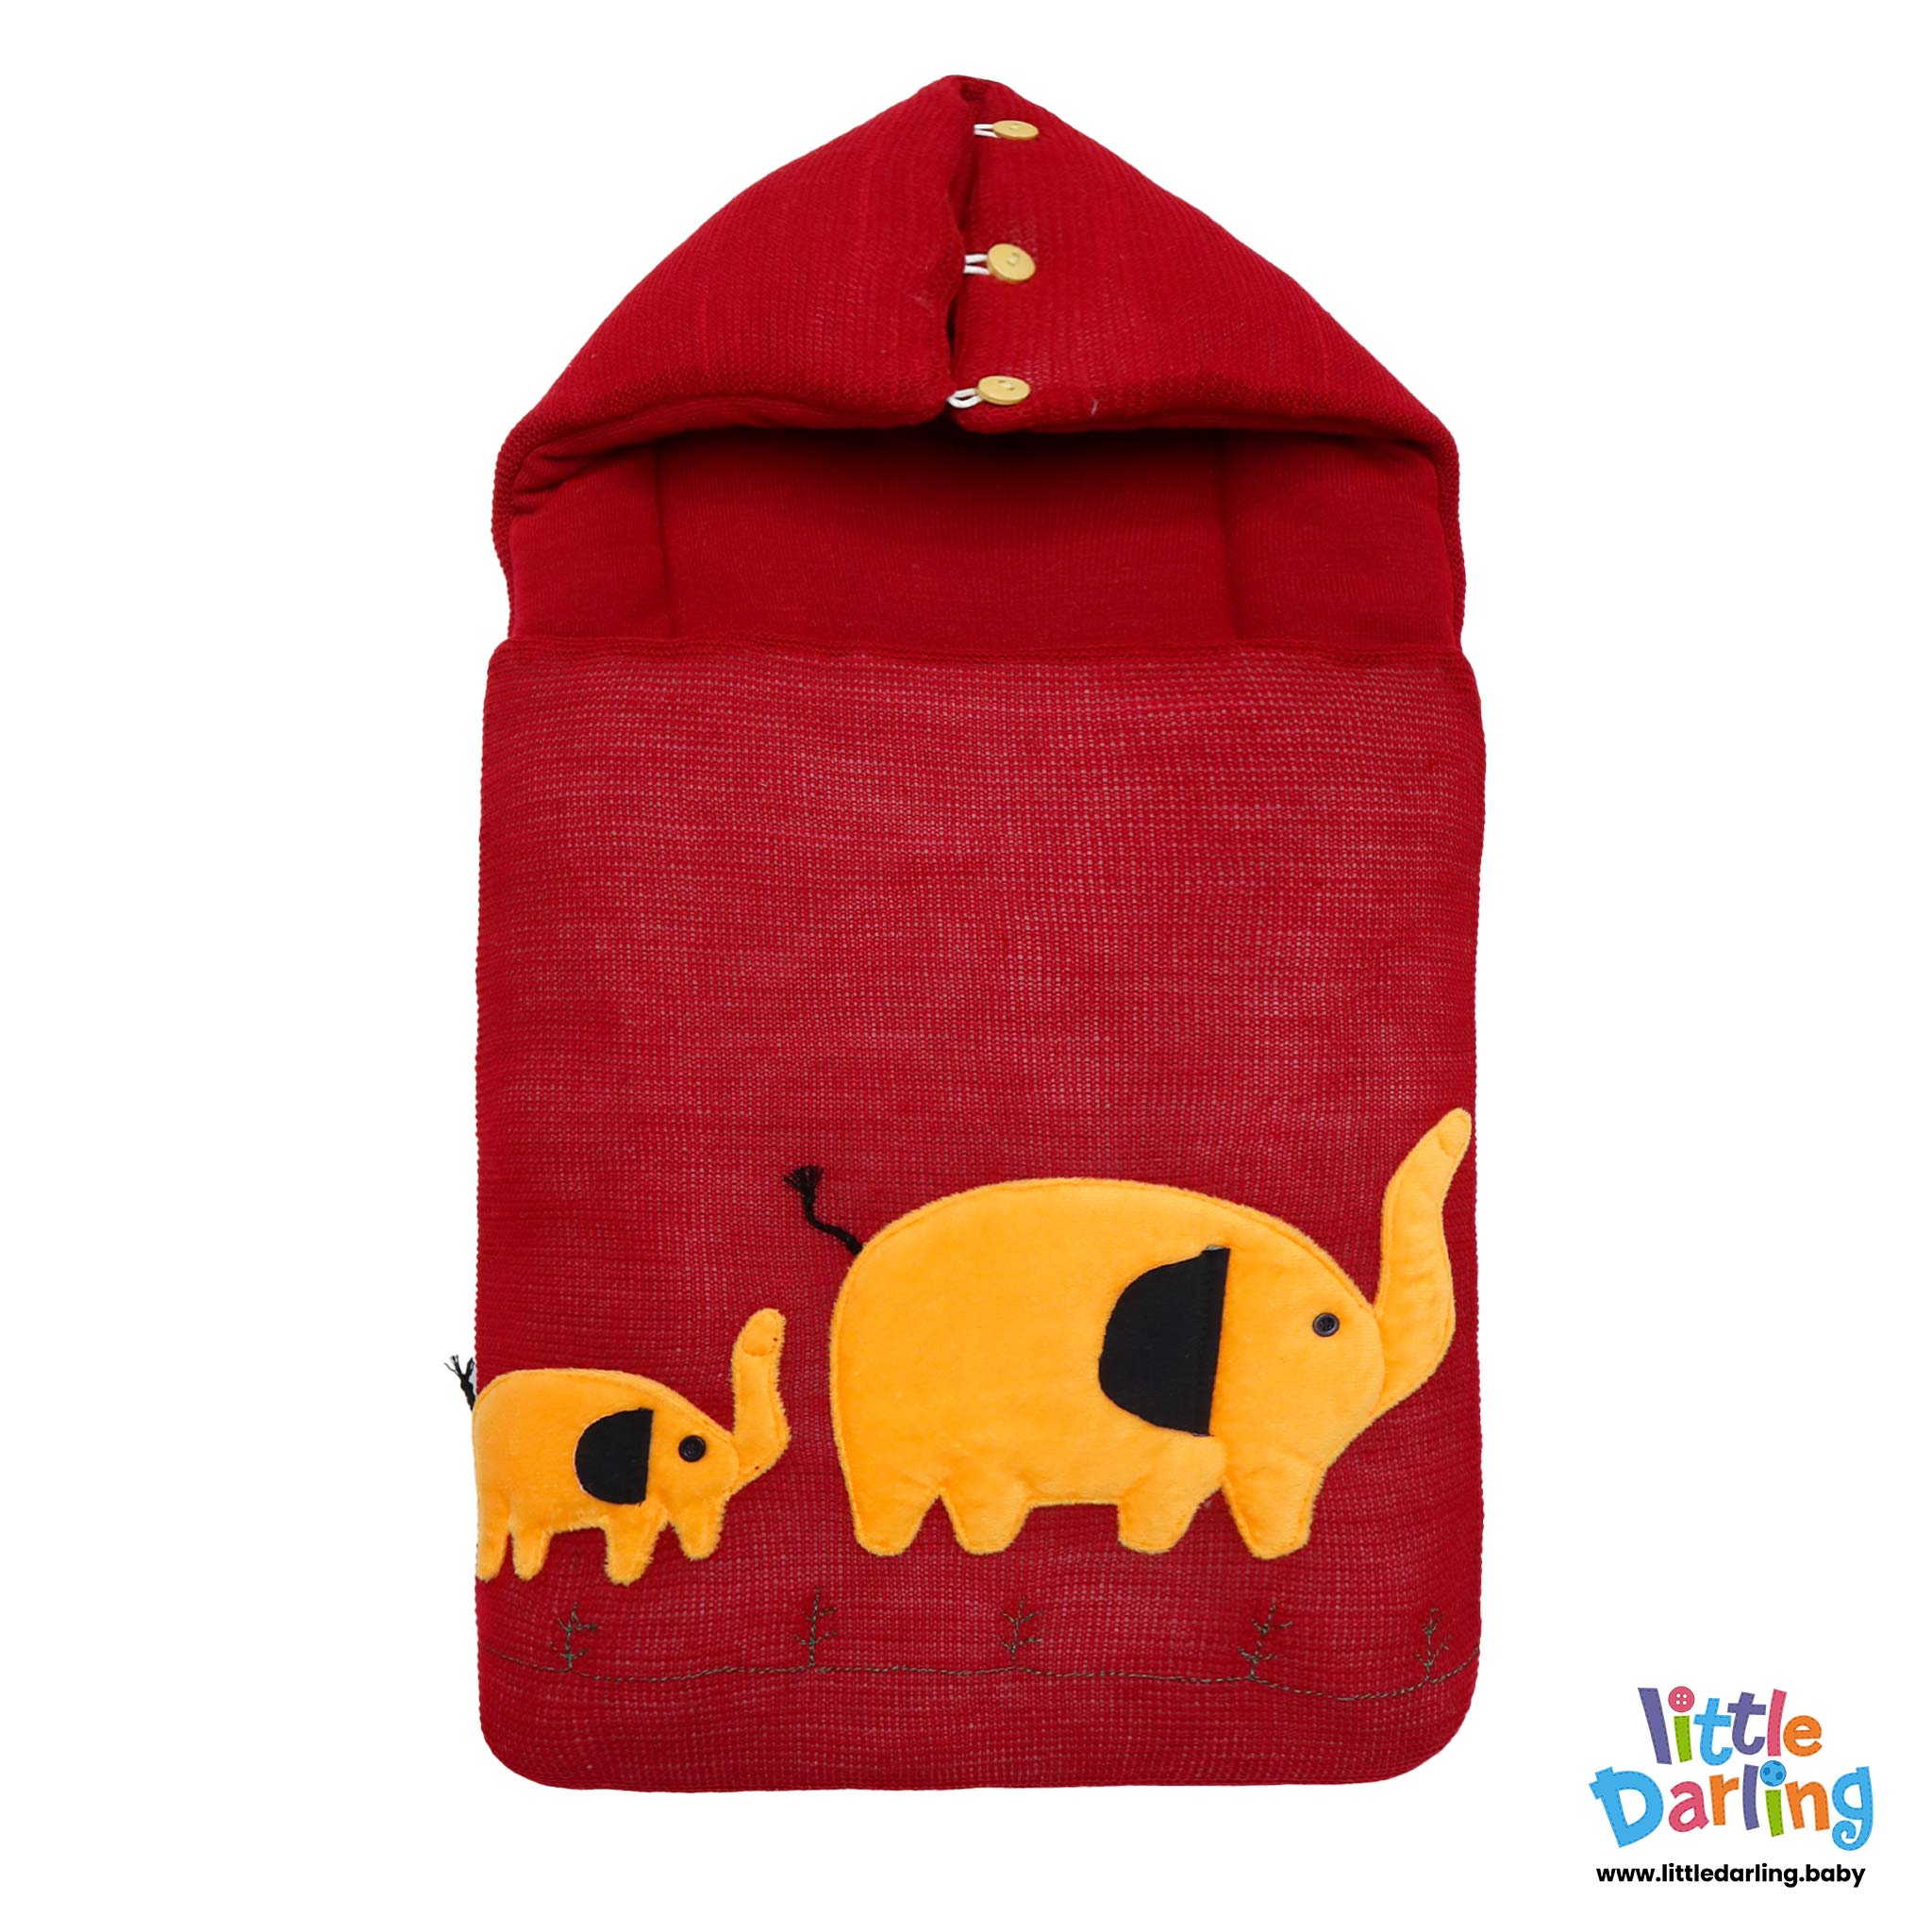 Baby Carry Nest Hooded With Pillow Elephant Embossed Red Color by Little Darling